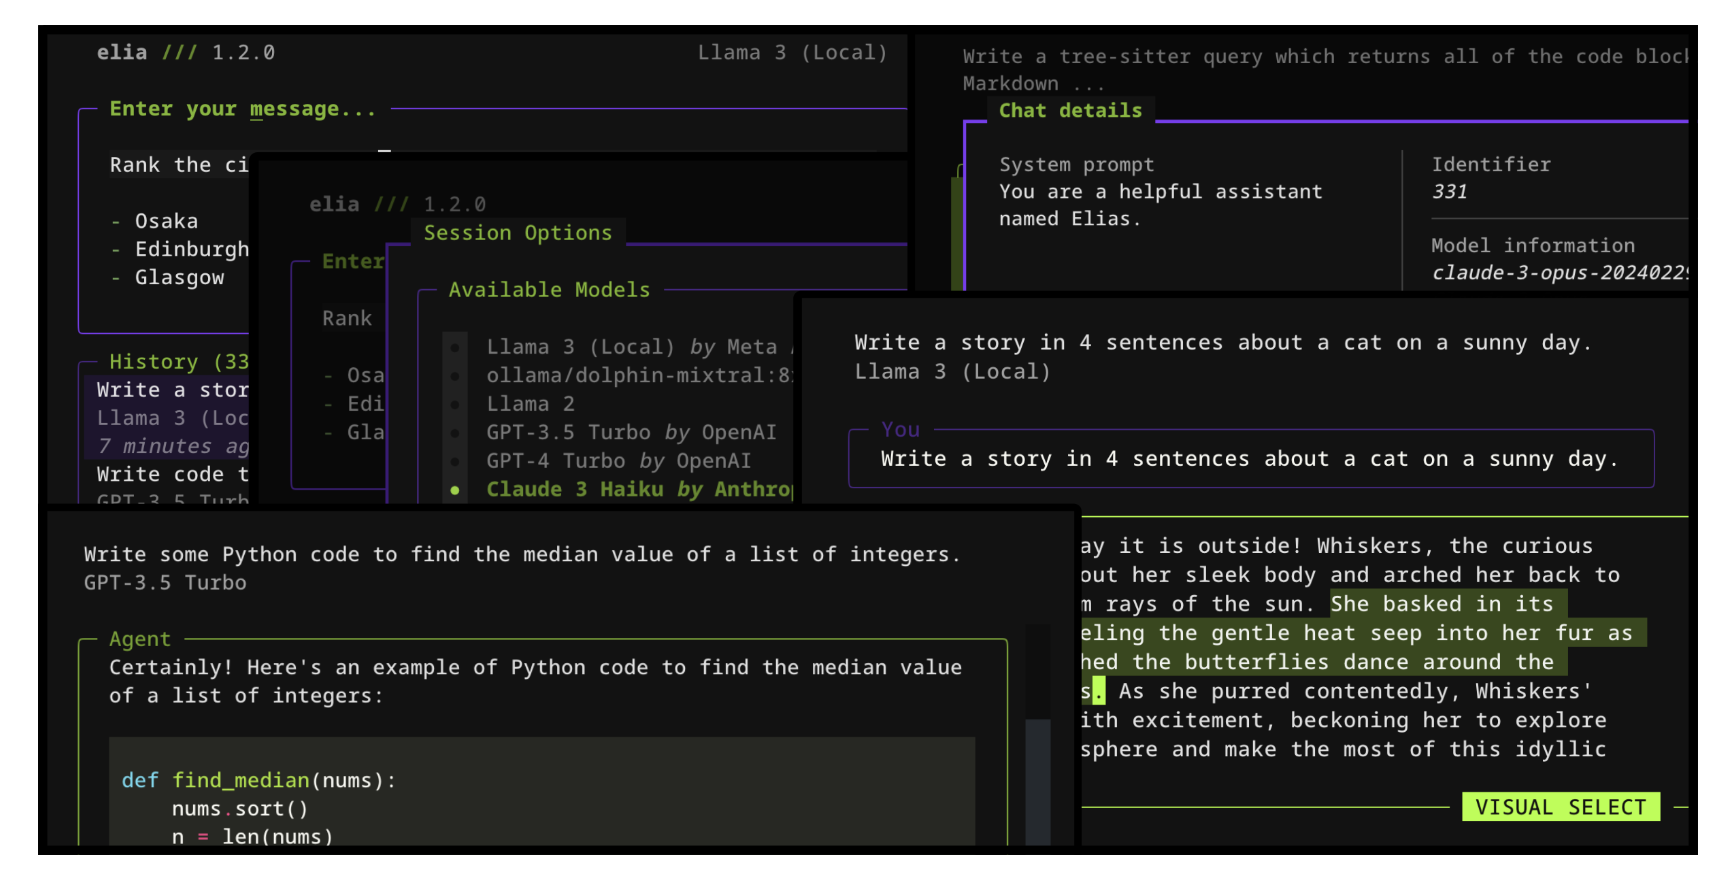  Elia: An Open Source Terminal UI for Interacting with LLMs